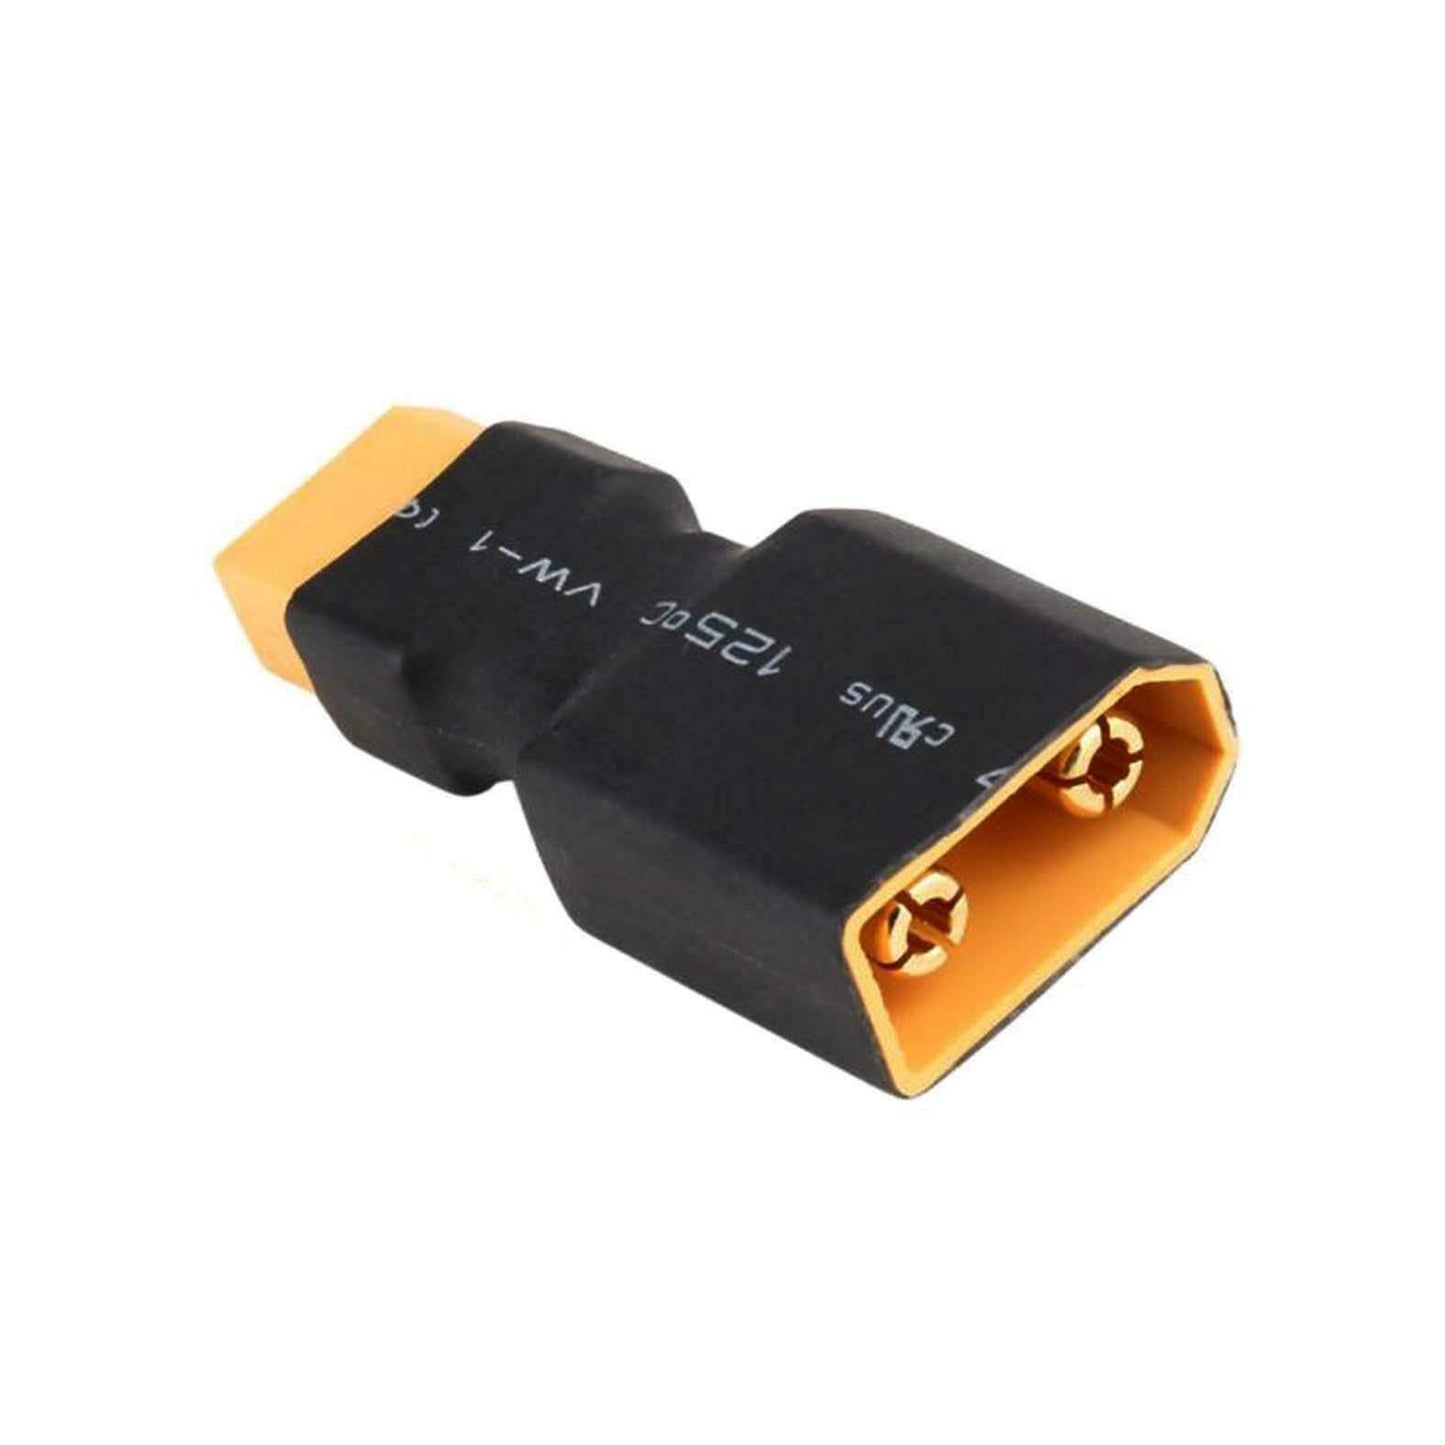 XT60 to XT90 Female/Male Male/Female Adapter Connector